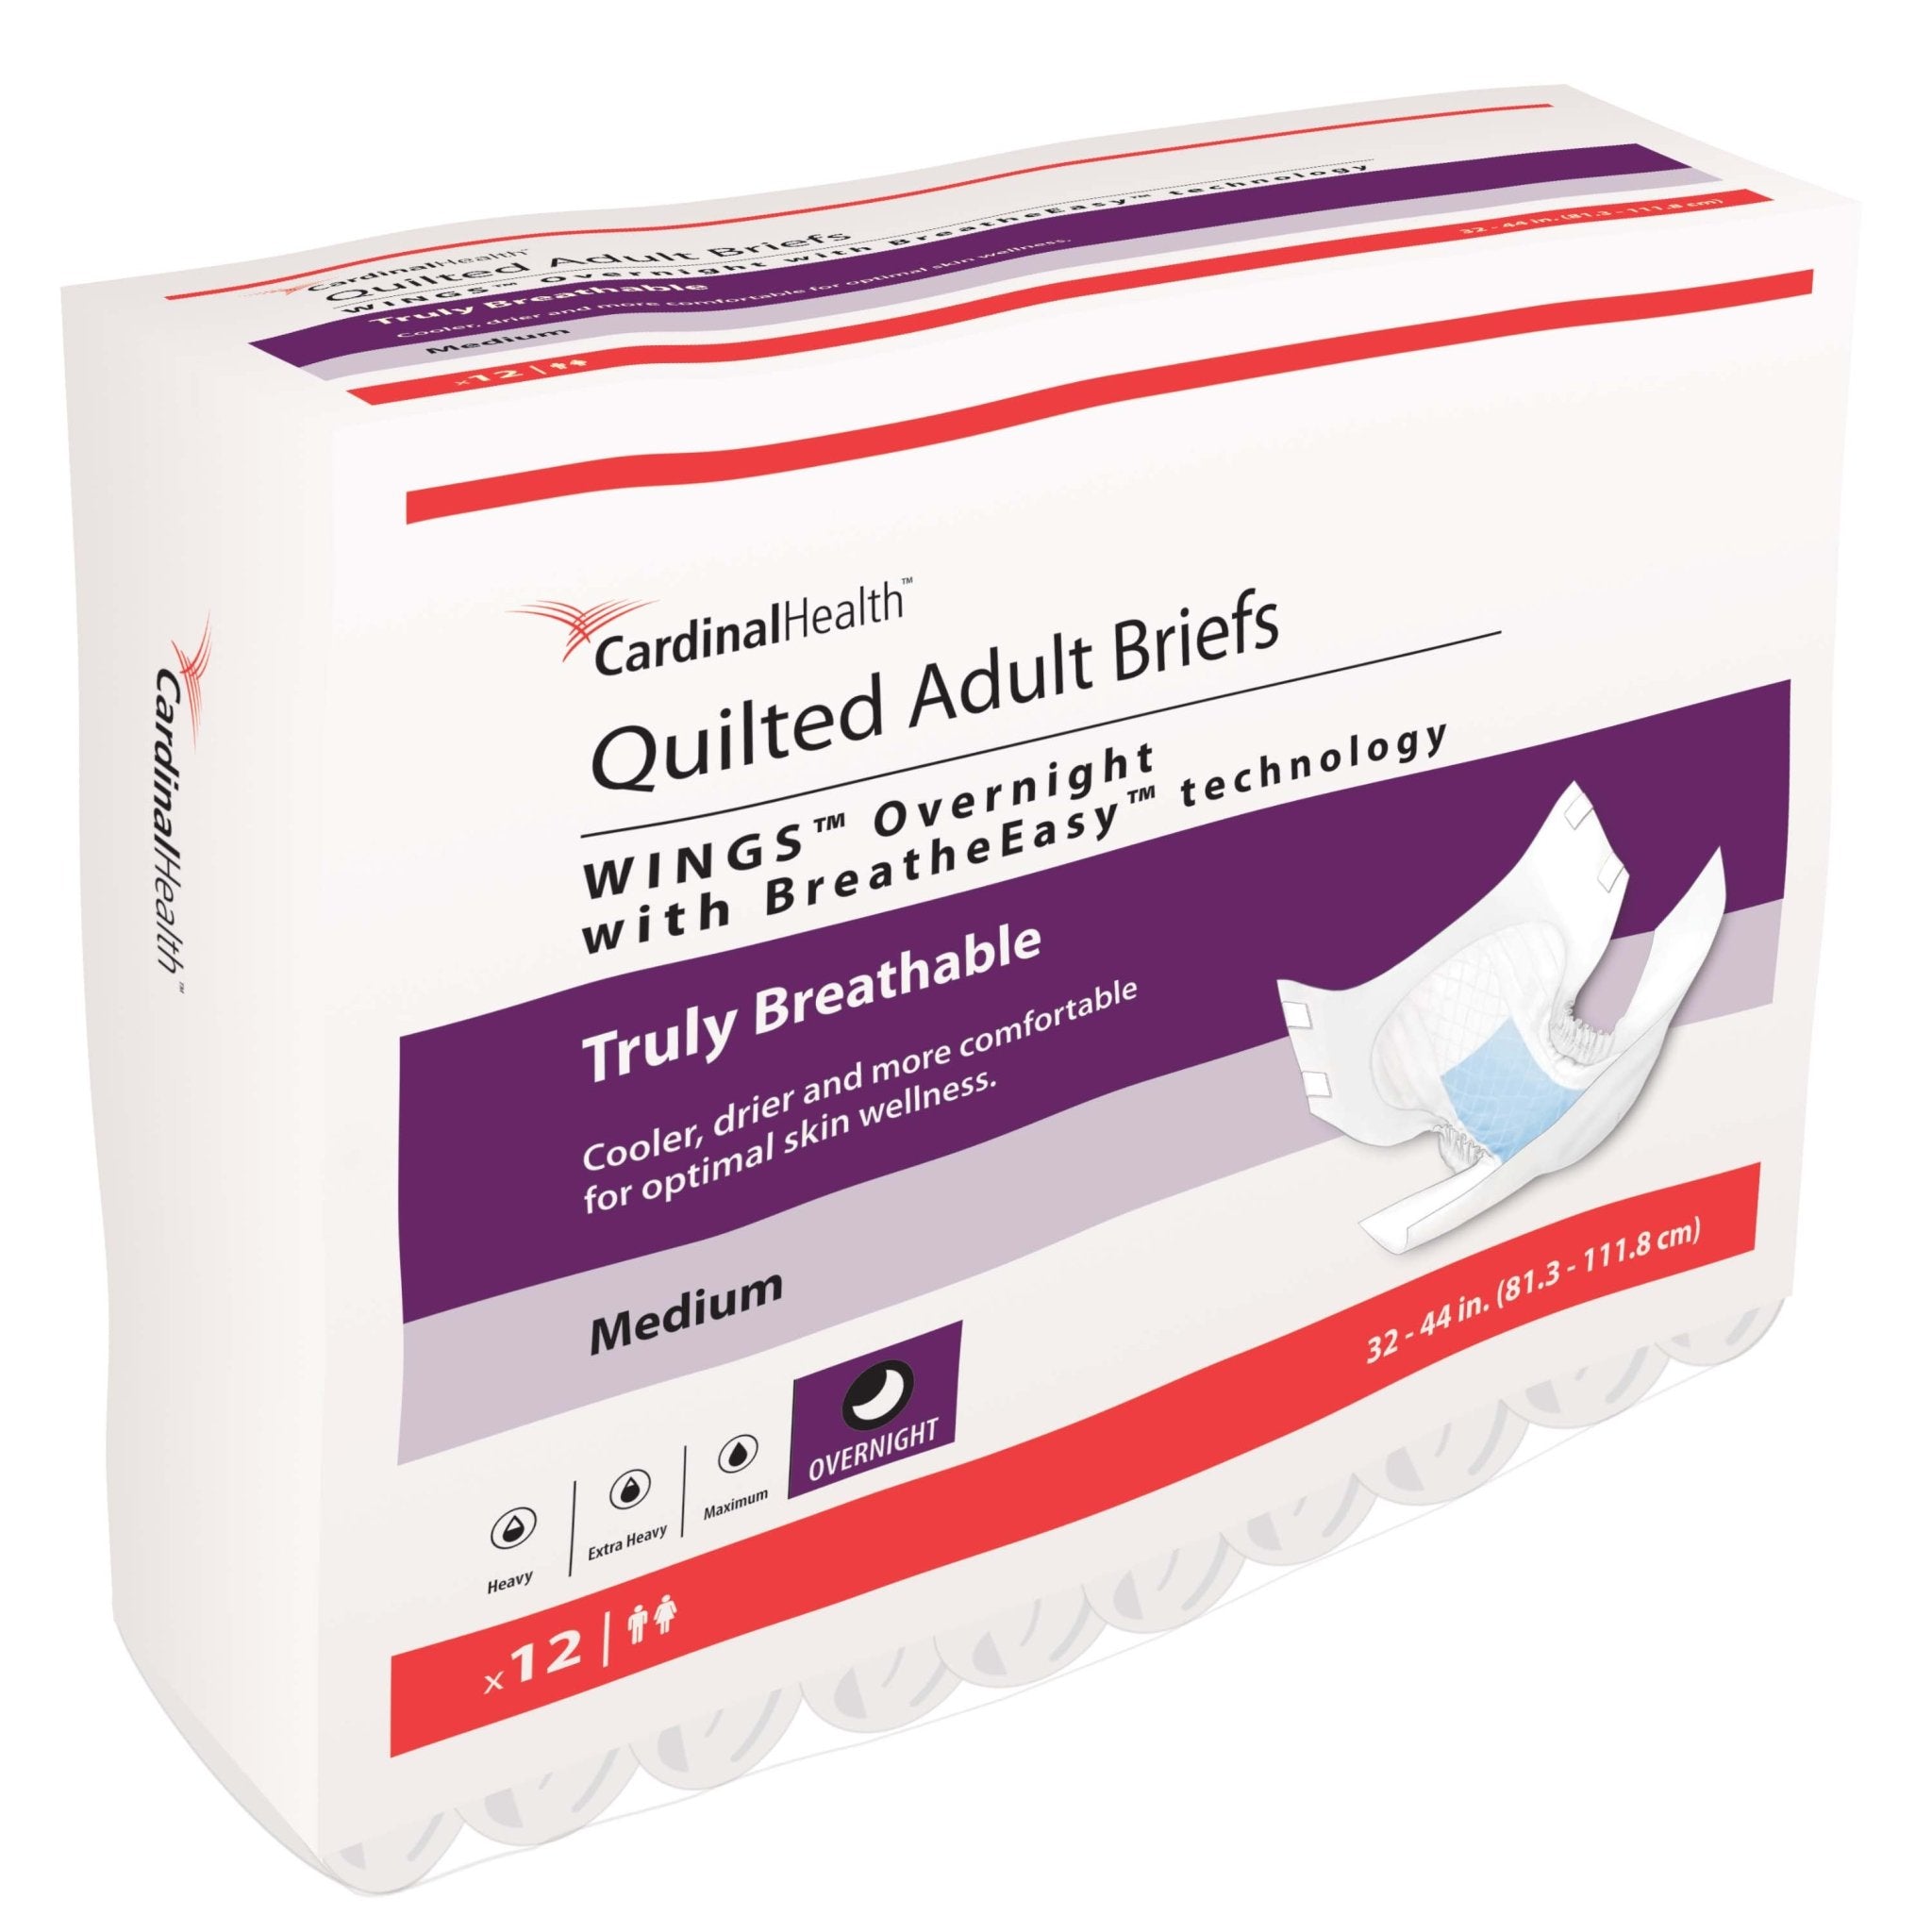 PK/12 - Cardinal Health, Quilted Adult Briefs, Wings™ Overnight, Medium, 32" - 44" - Best Buy Medical Supplies